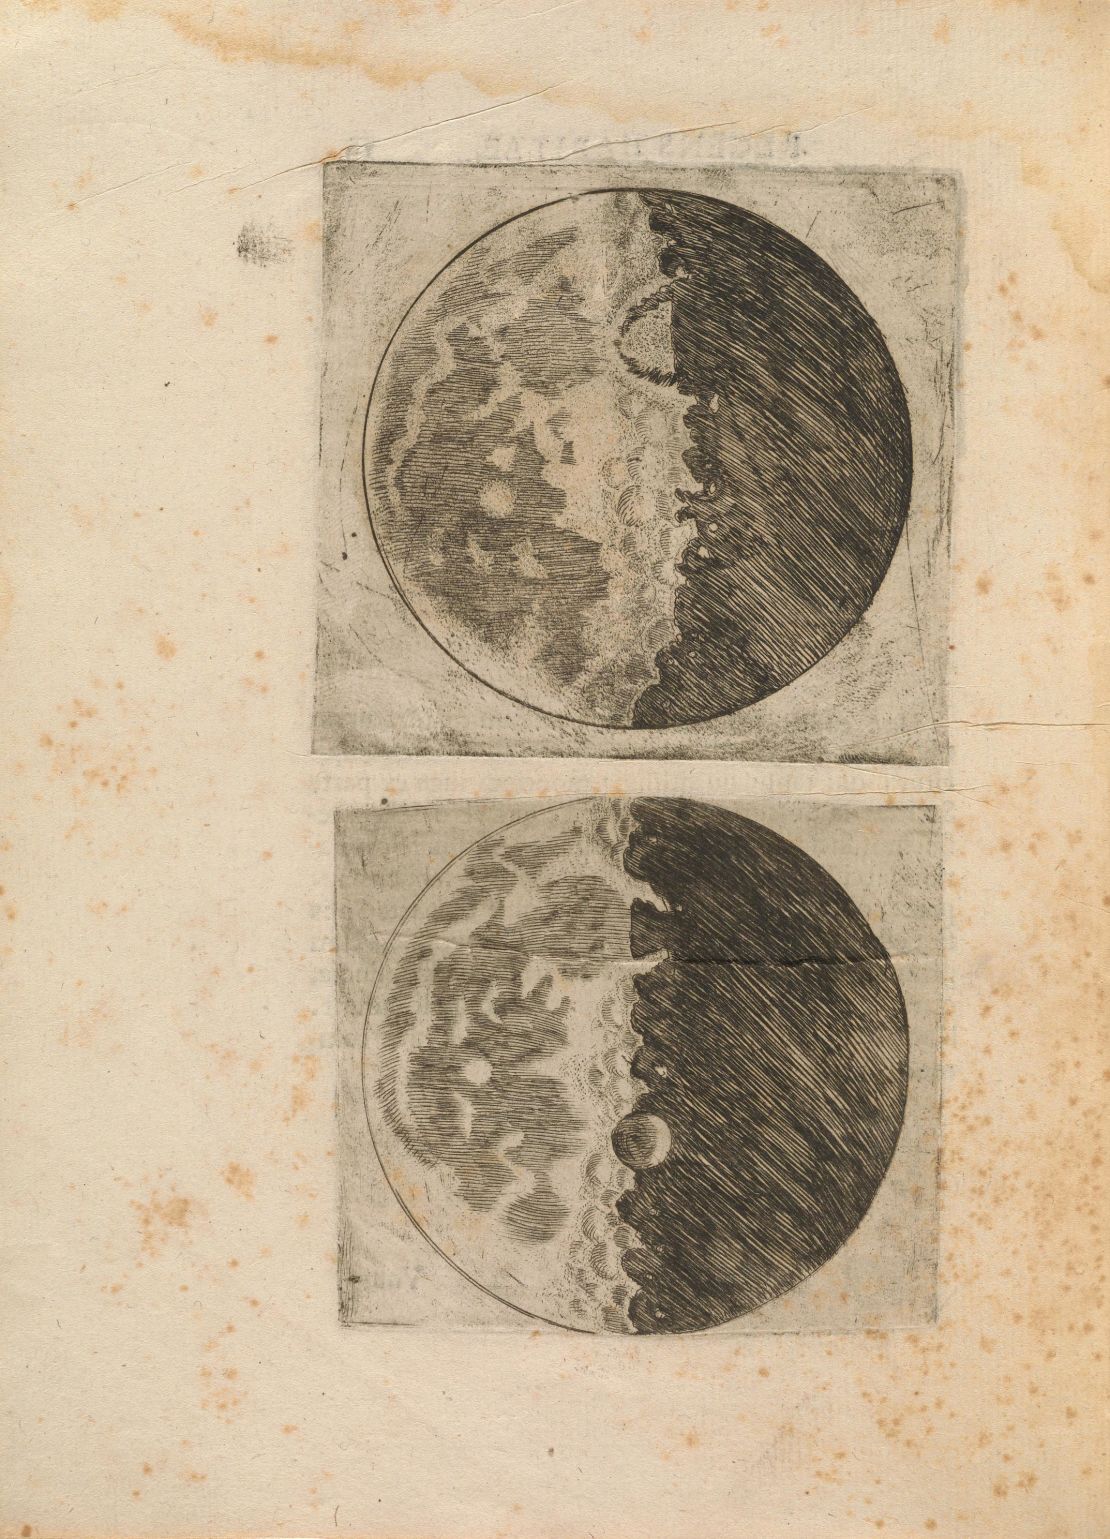 Galileo's "Two Drawings of Waxing Moon," from "Siderius Nuncius" (1610).